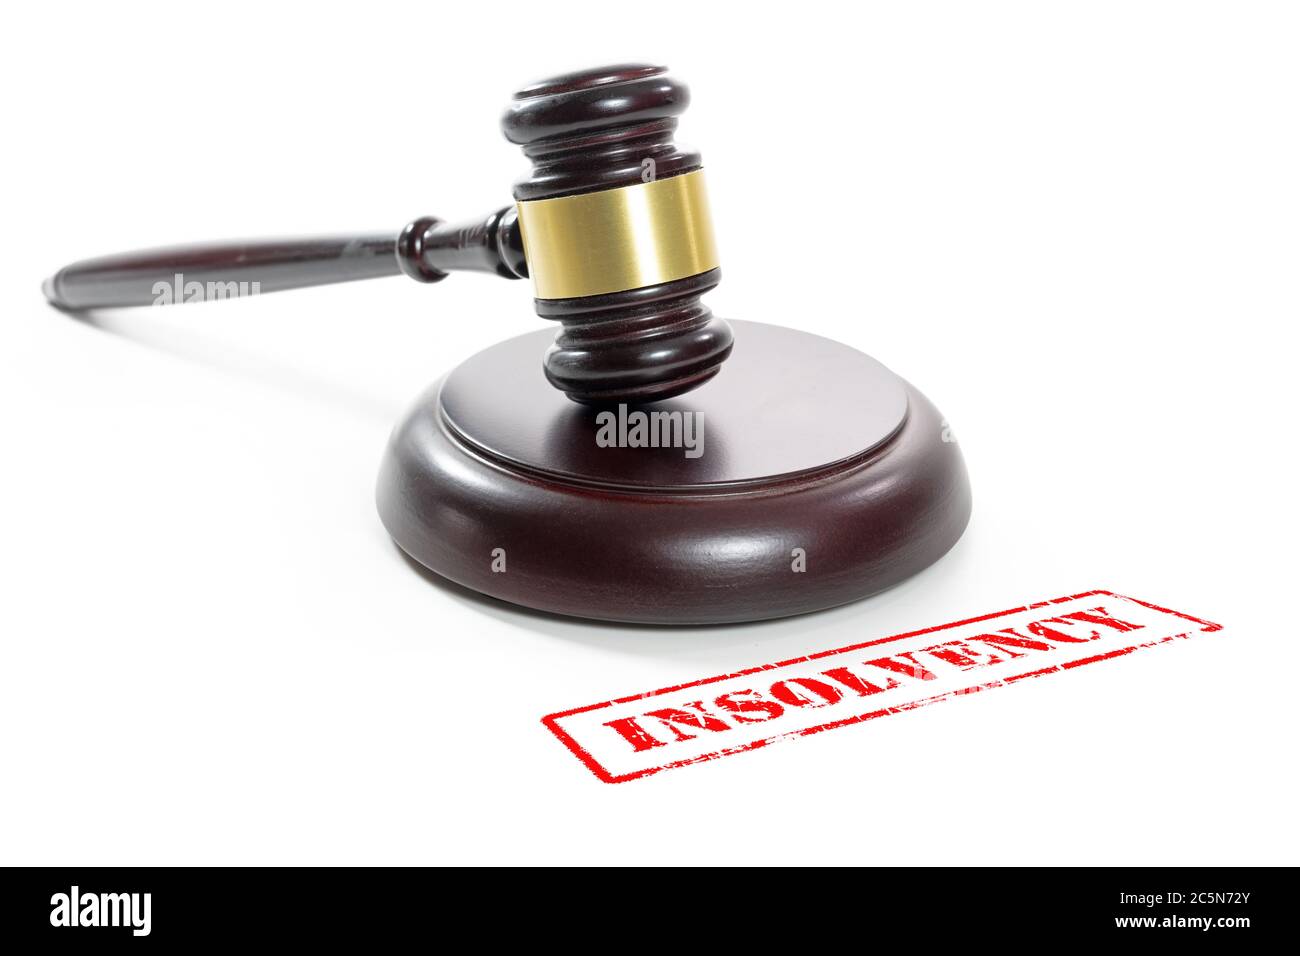 Judge gavel and a red stamp with the word Insolvency, companies are going bankrupt due to the coronavirus crisis, isolated on a white background Stock Photo